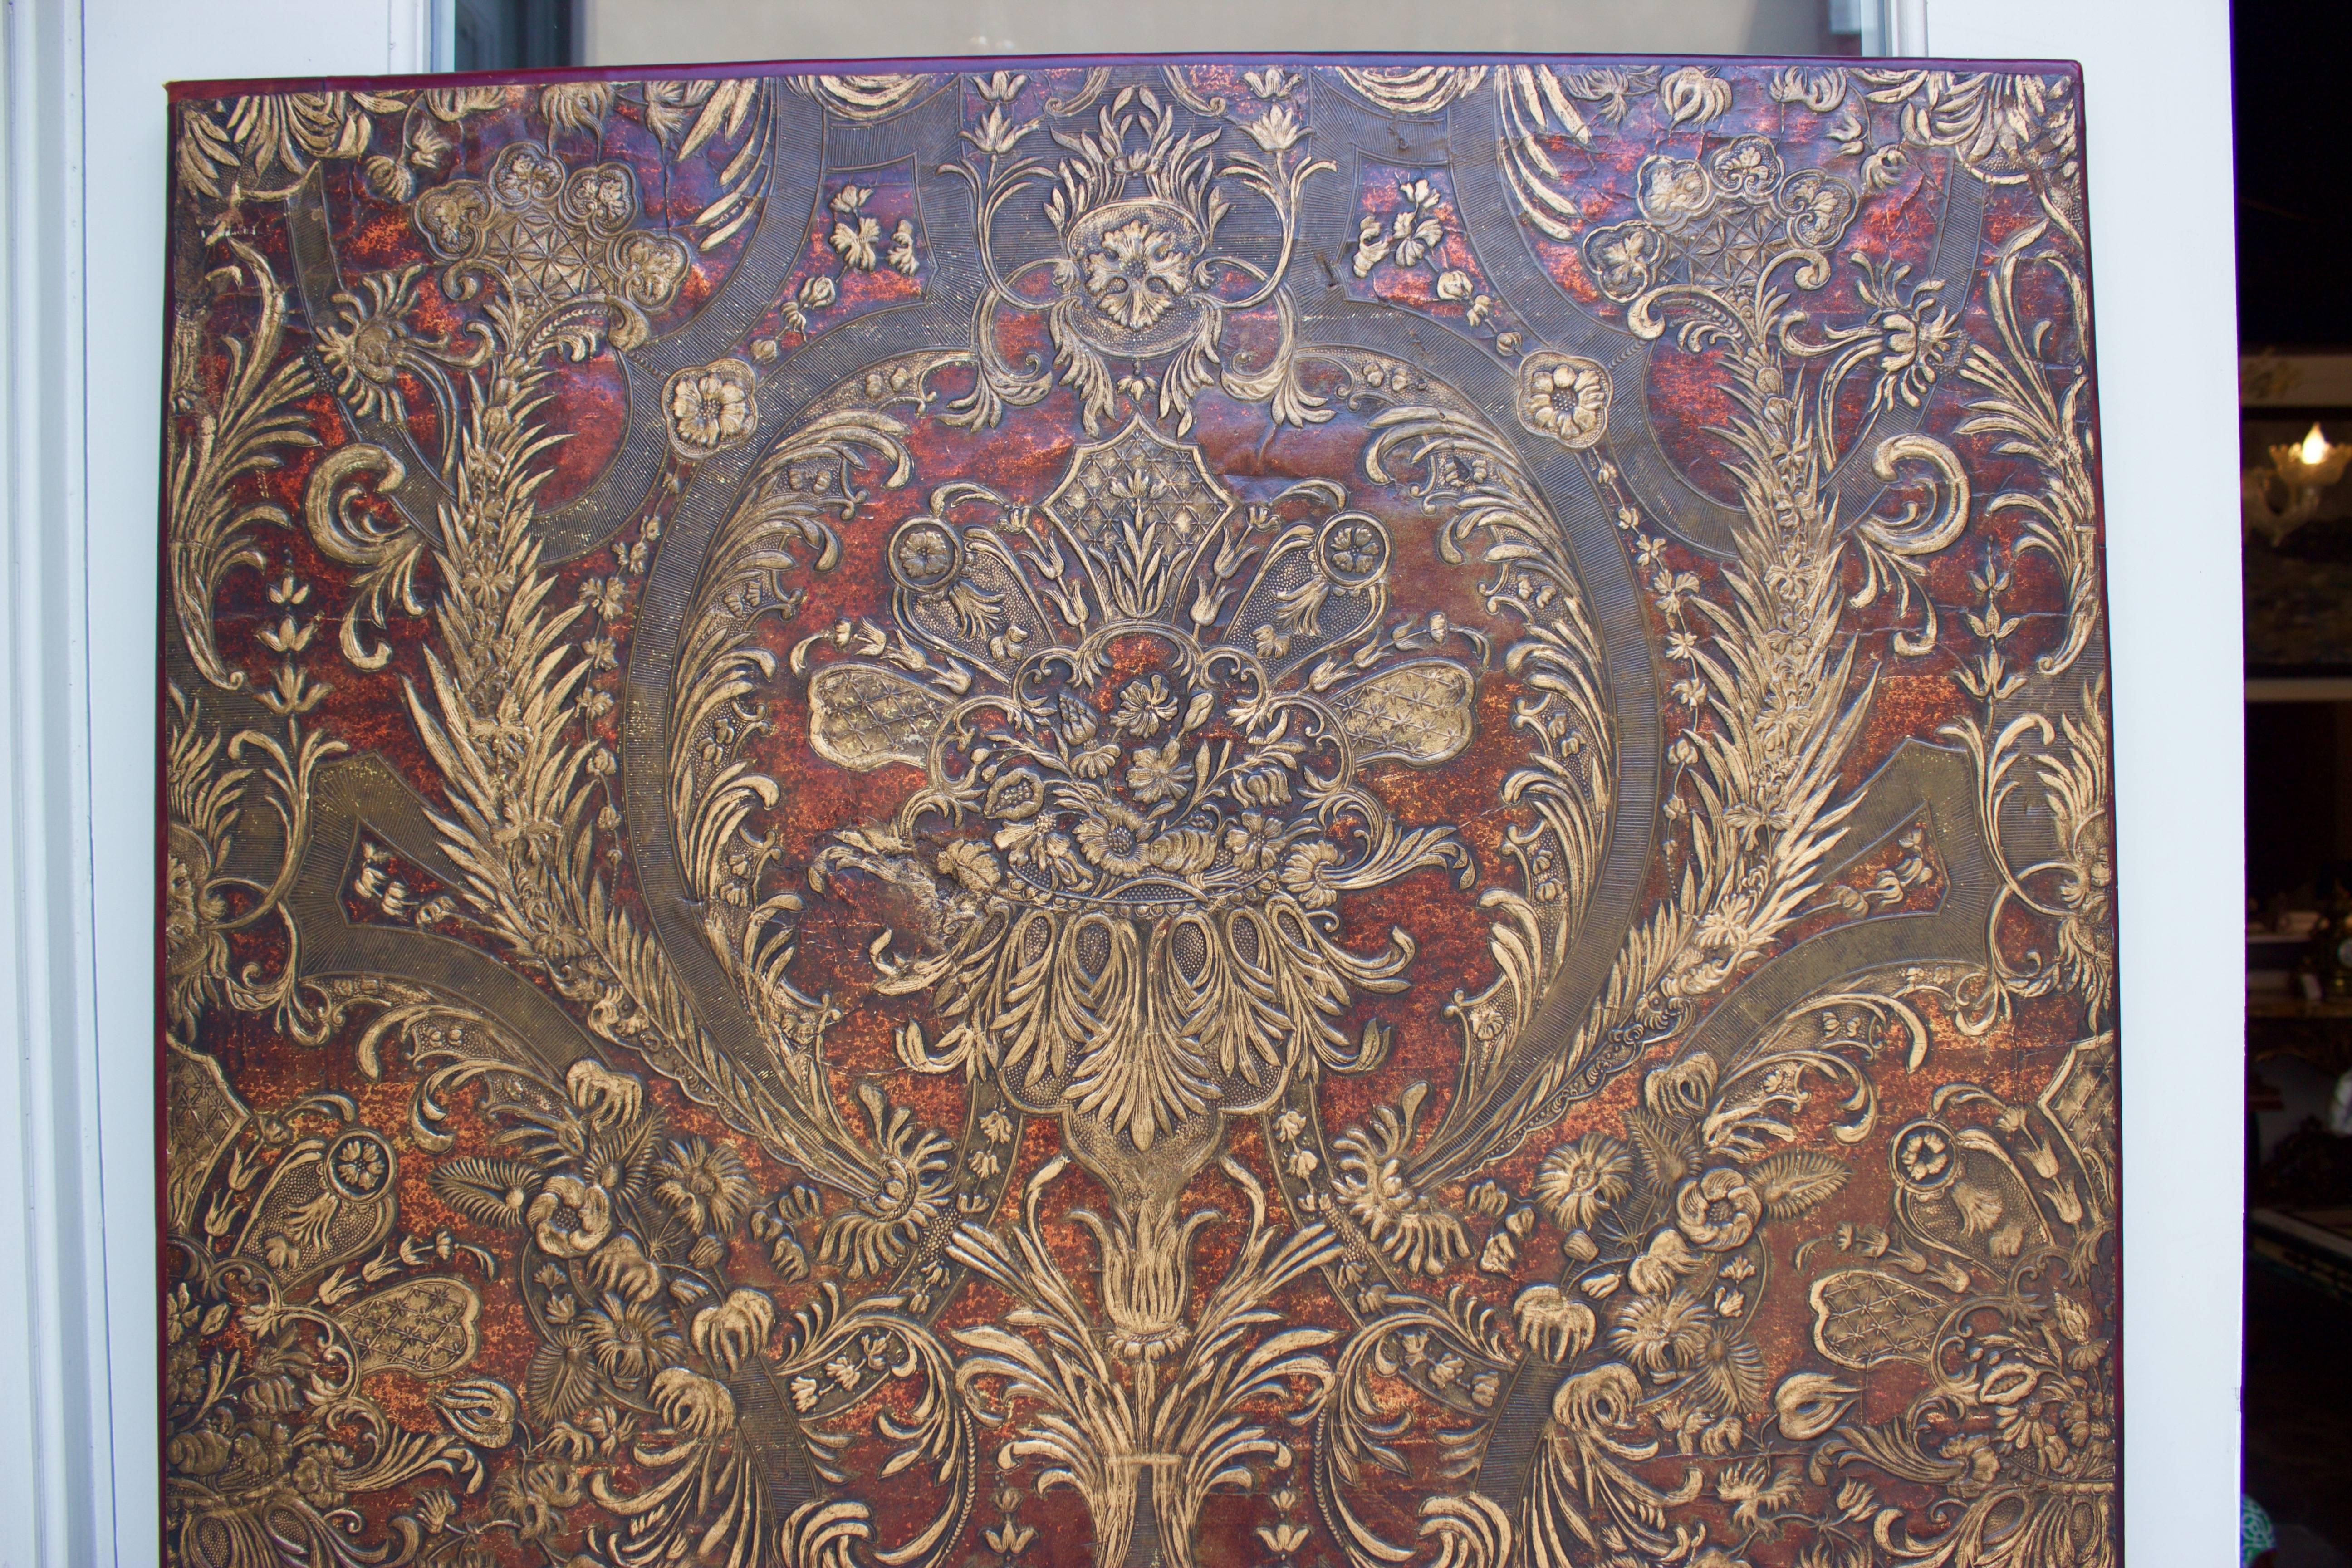 Polychrome and glazed heavy weight pressed paper panel of scrolling floral sprays. Surrounded and backed by a wood frame. Was one of three panels forming a screen.